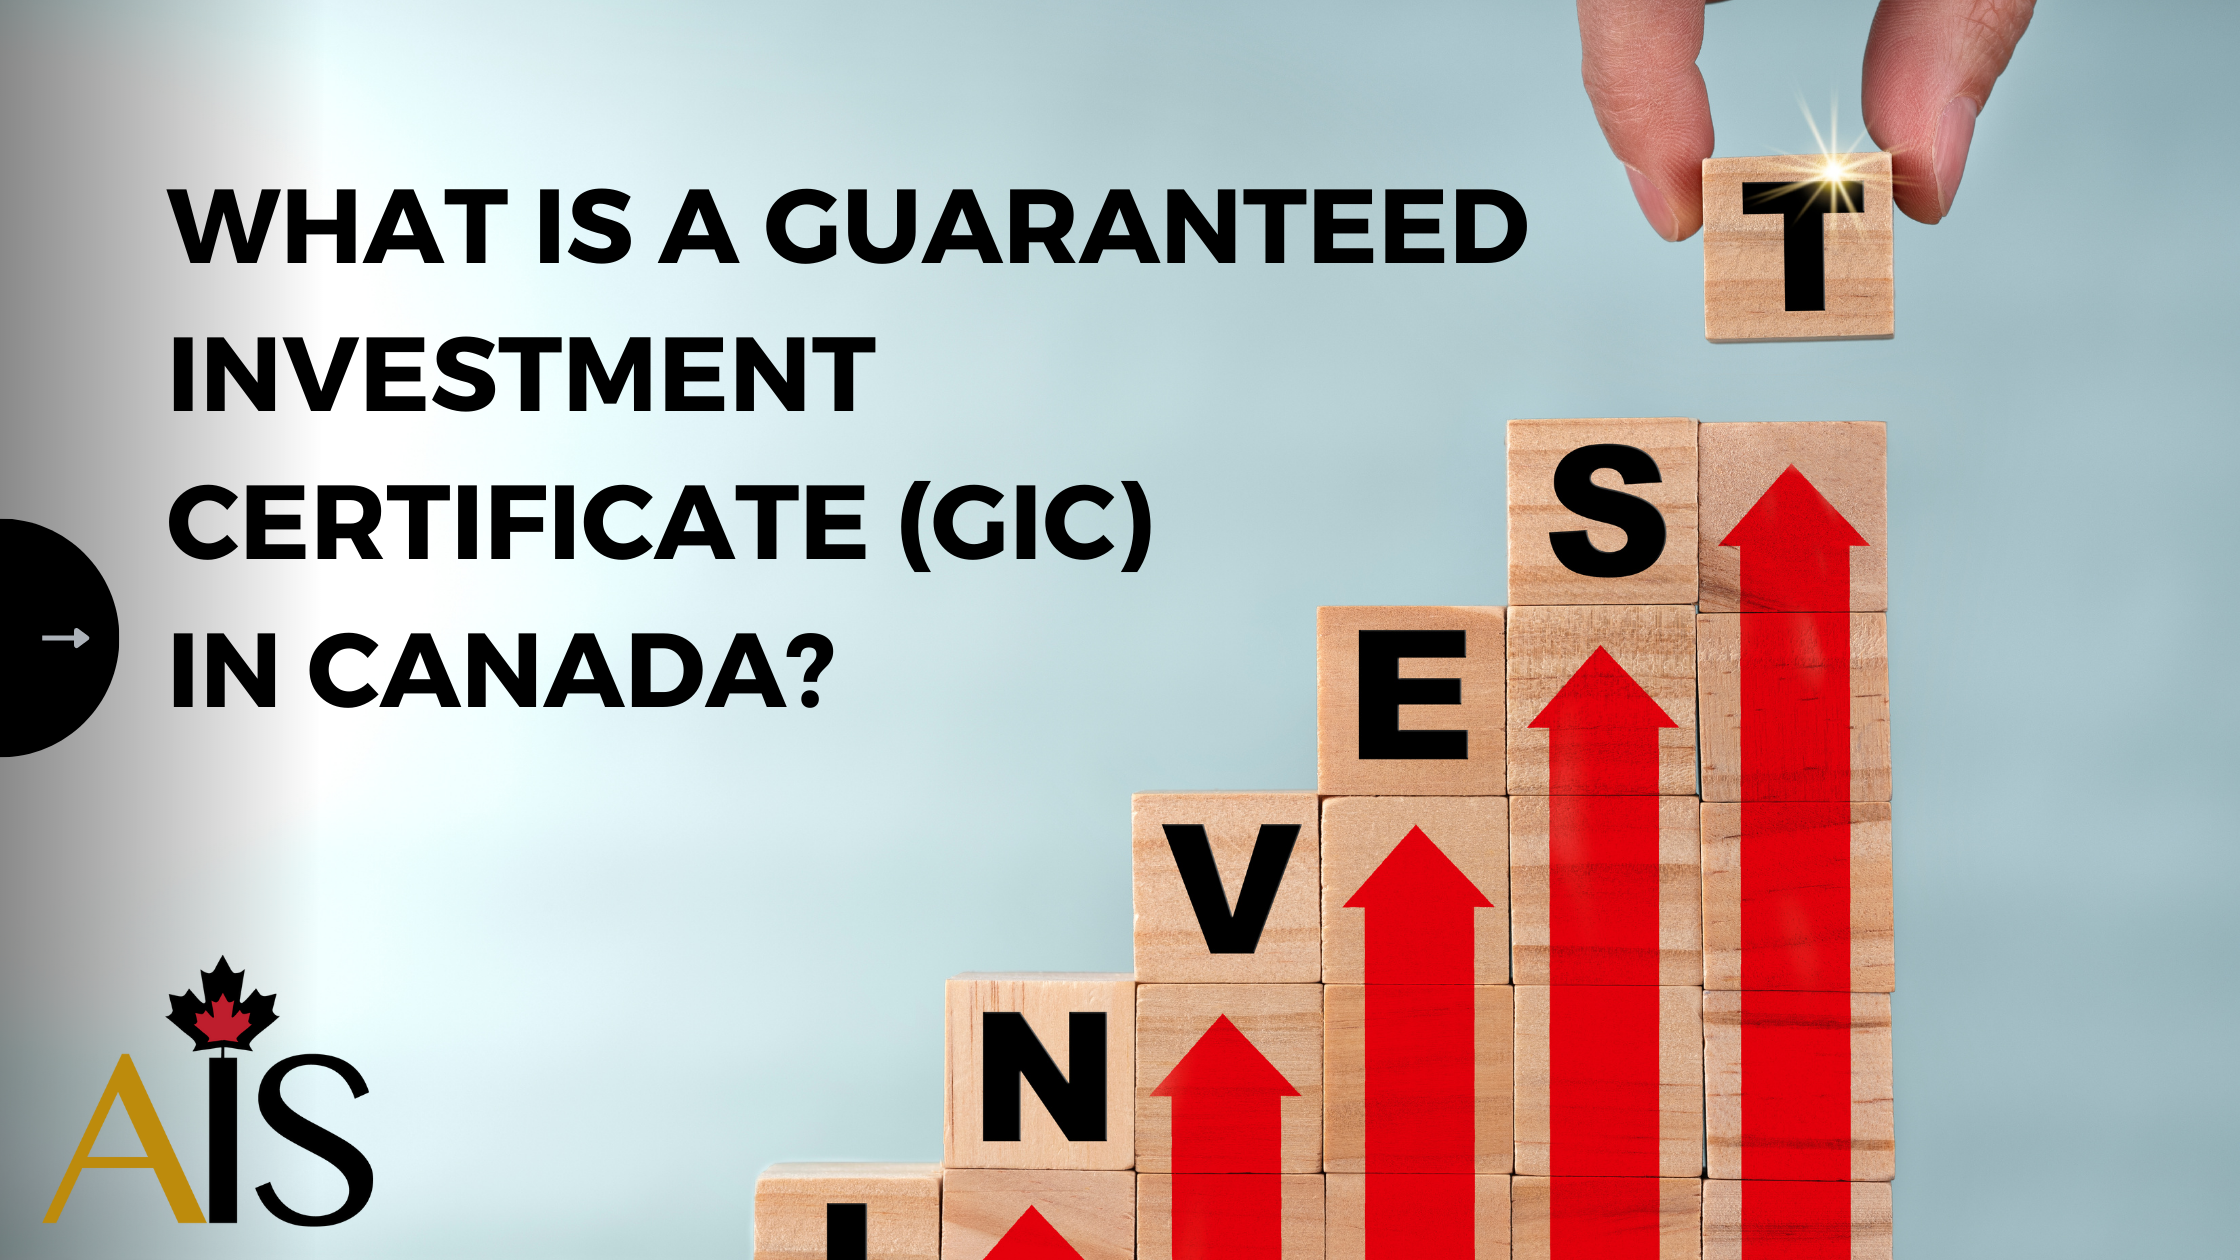 Canada: What is a Guaranteed Investment Certificate (GIC)?